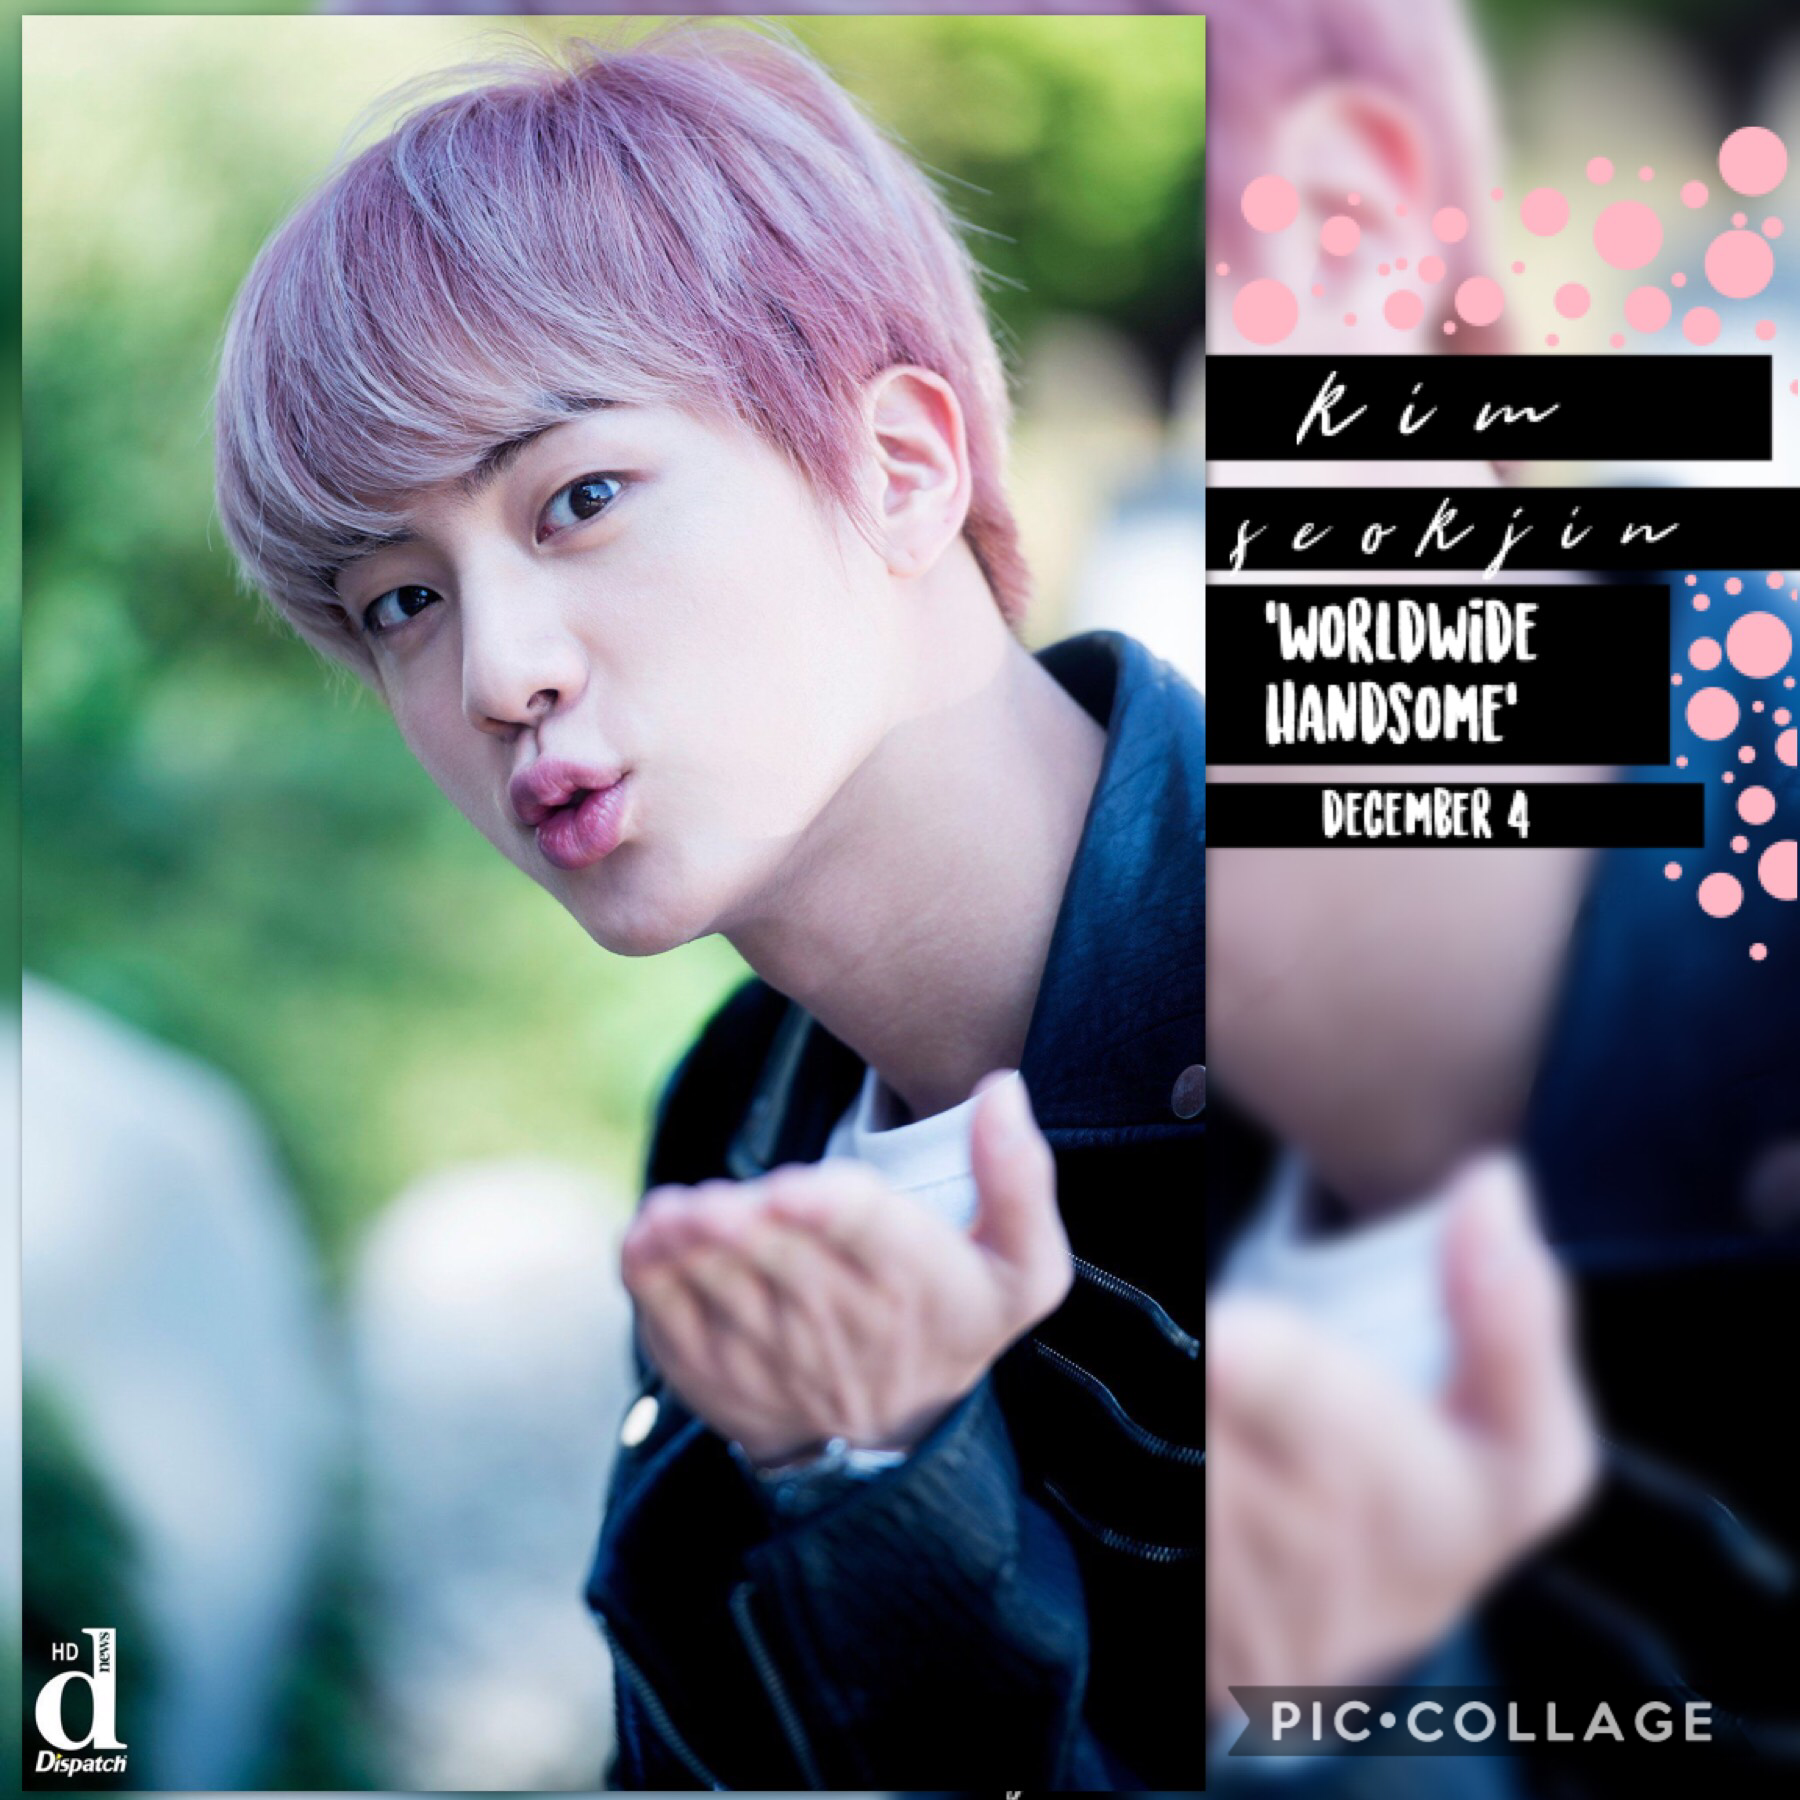 ✨ happy jin day // tap✨

honestly what can i say? haPpY BiRthAY to this amazing talented man. you bless us with your angelic voice and your windshield wiper laugh every day. you are worldwide handsome and we love you jin!! <3